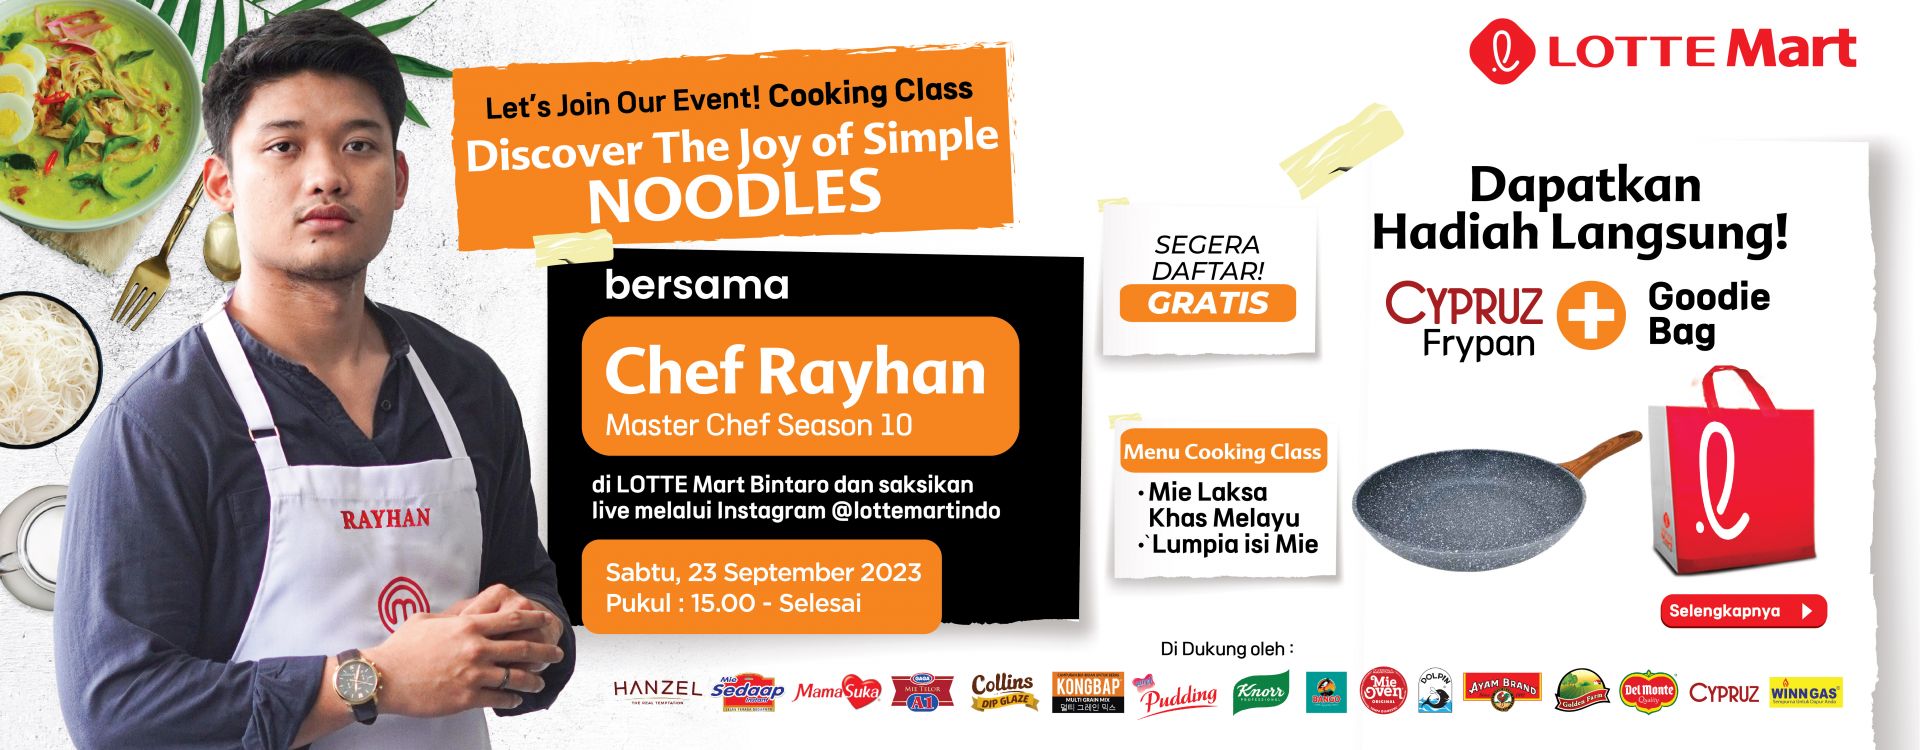 https://lottemart.co.id/Cooking Class Spesial Cooking Fair